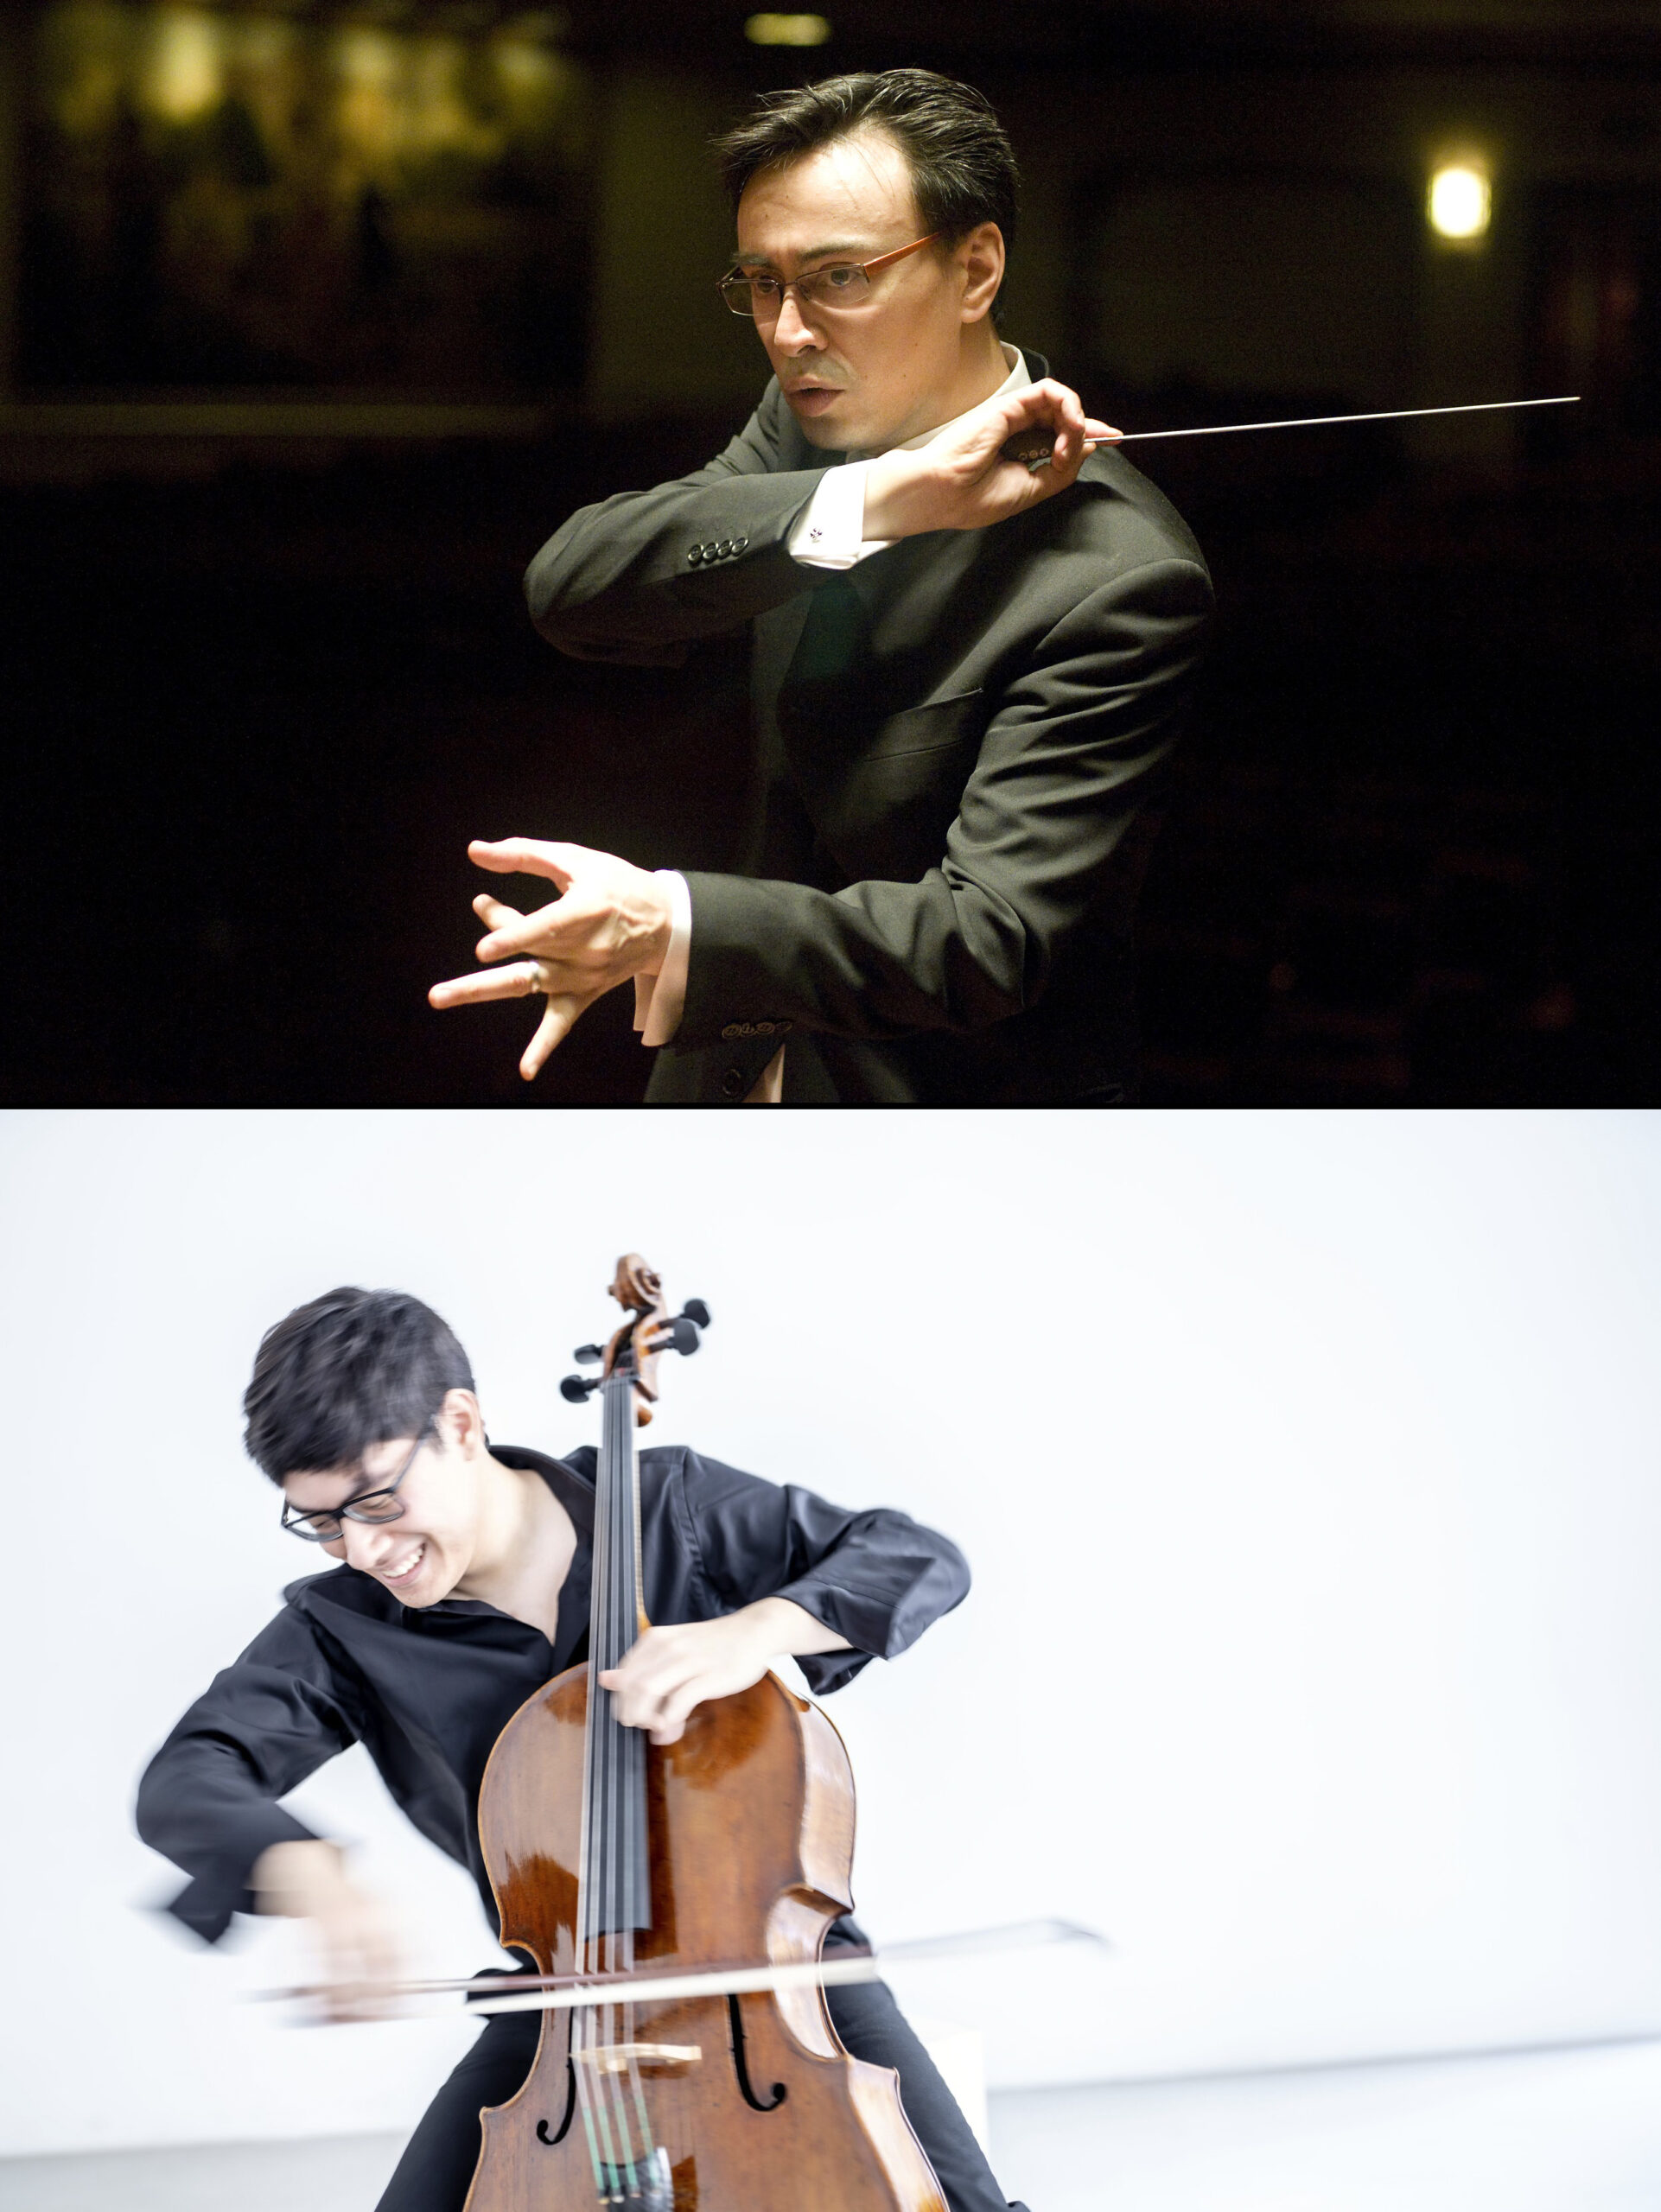 In two images, top and bottom, a man against a dark background wields a baton, and against a white background a man with glasses plays a cello